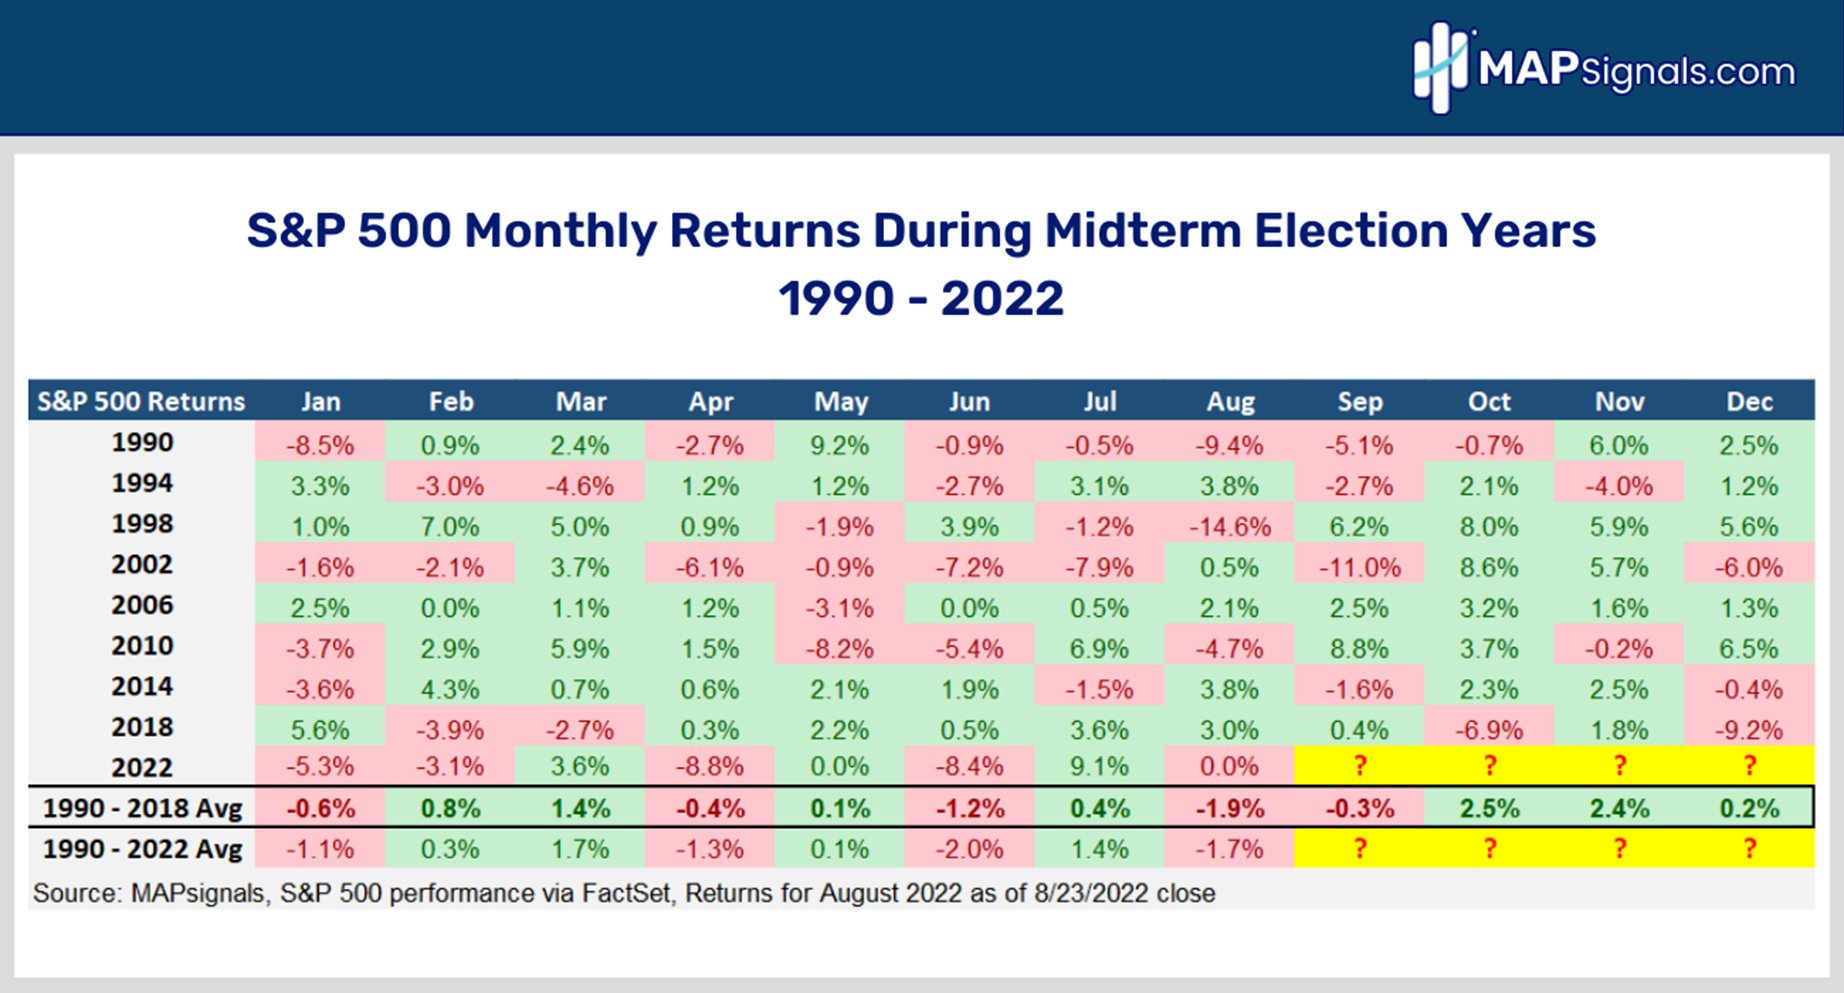 S&P 500 Monthly Returns During Midterm Election Years 1990-2022 | MAPsignals